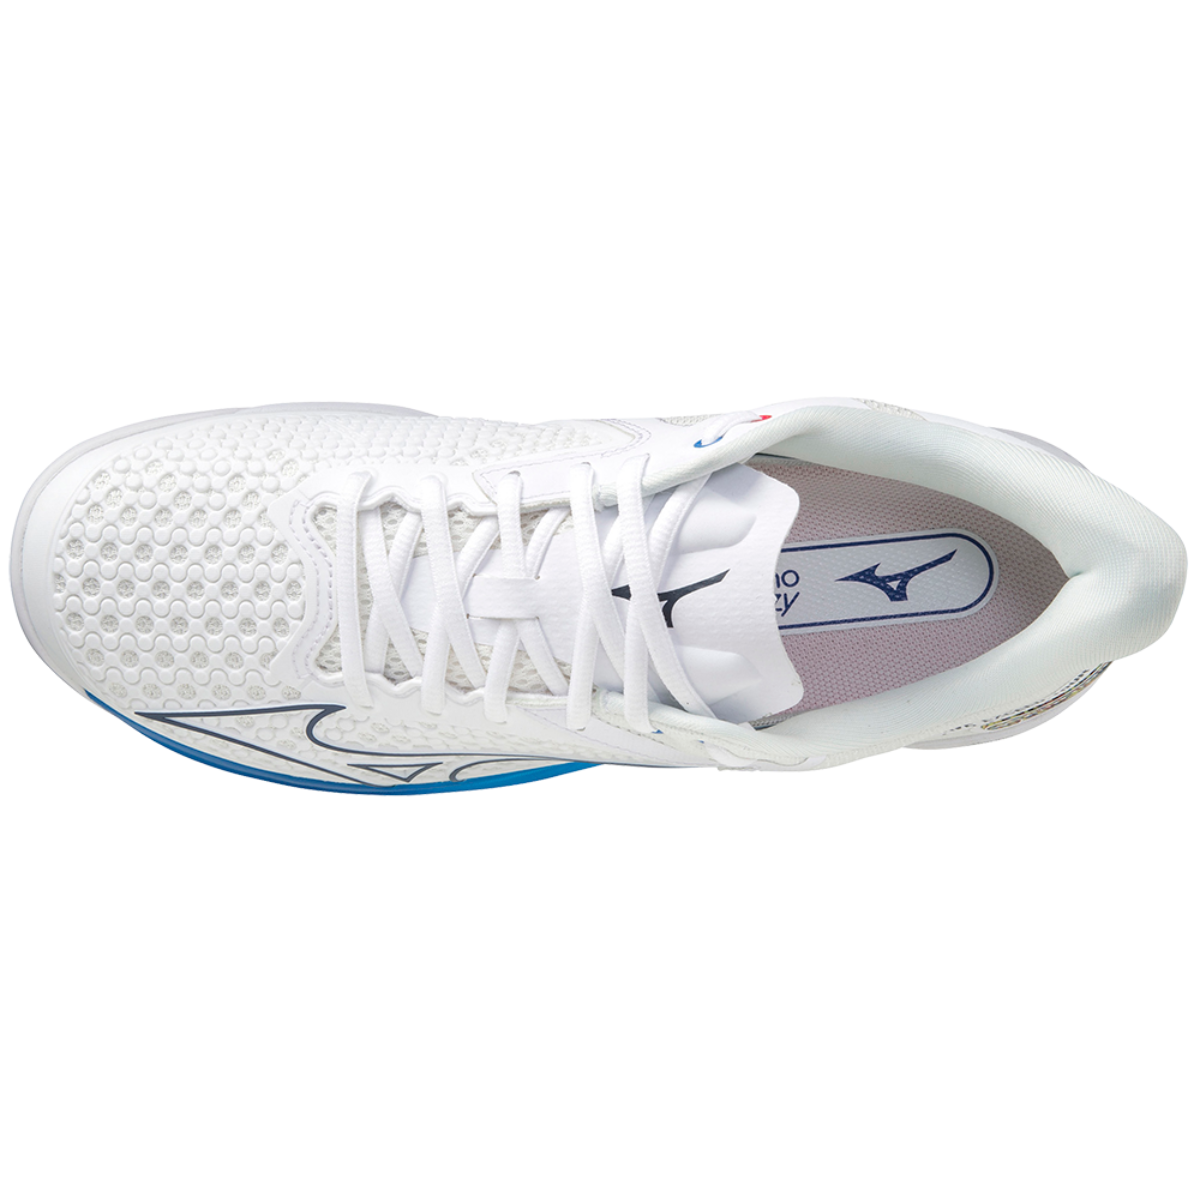 WAVE EXCEED TOUR 5 AC UNISEX White / Navy / Blue